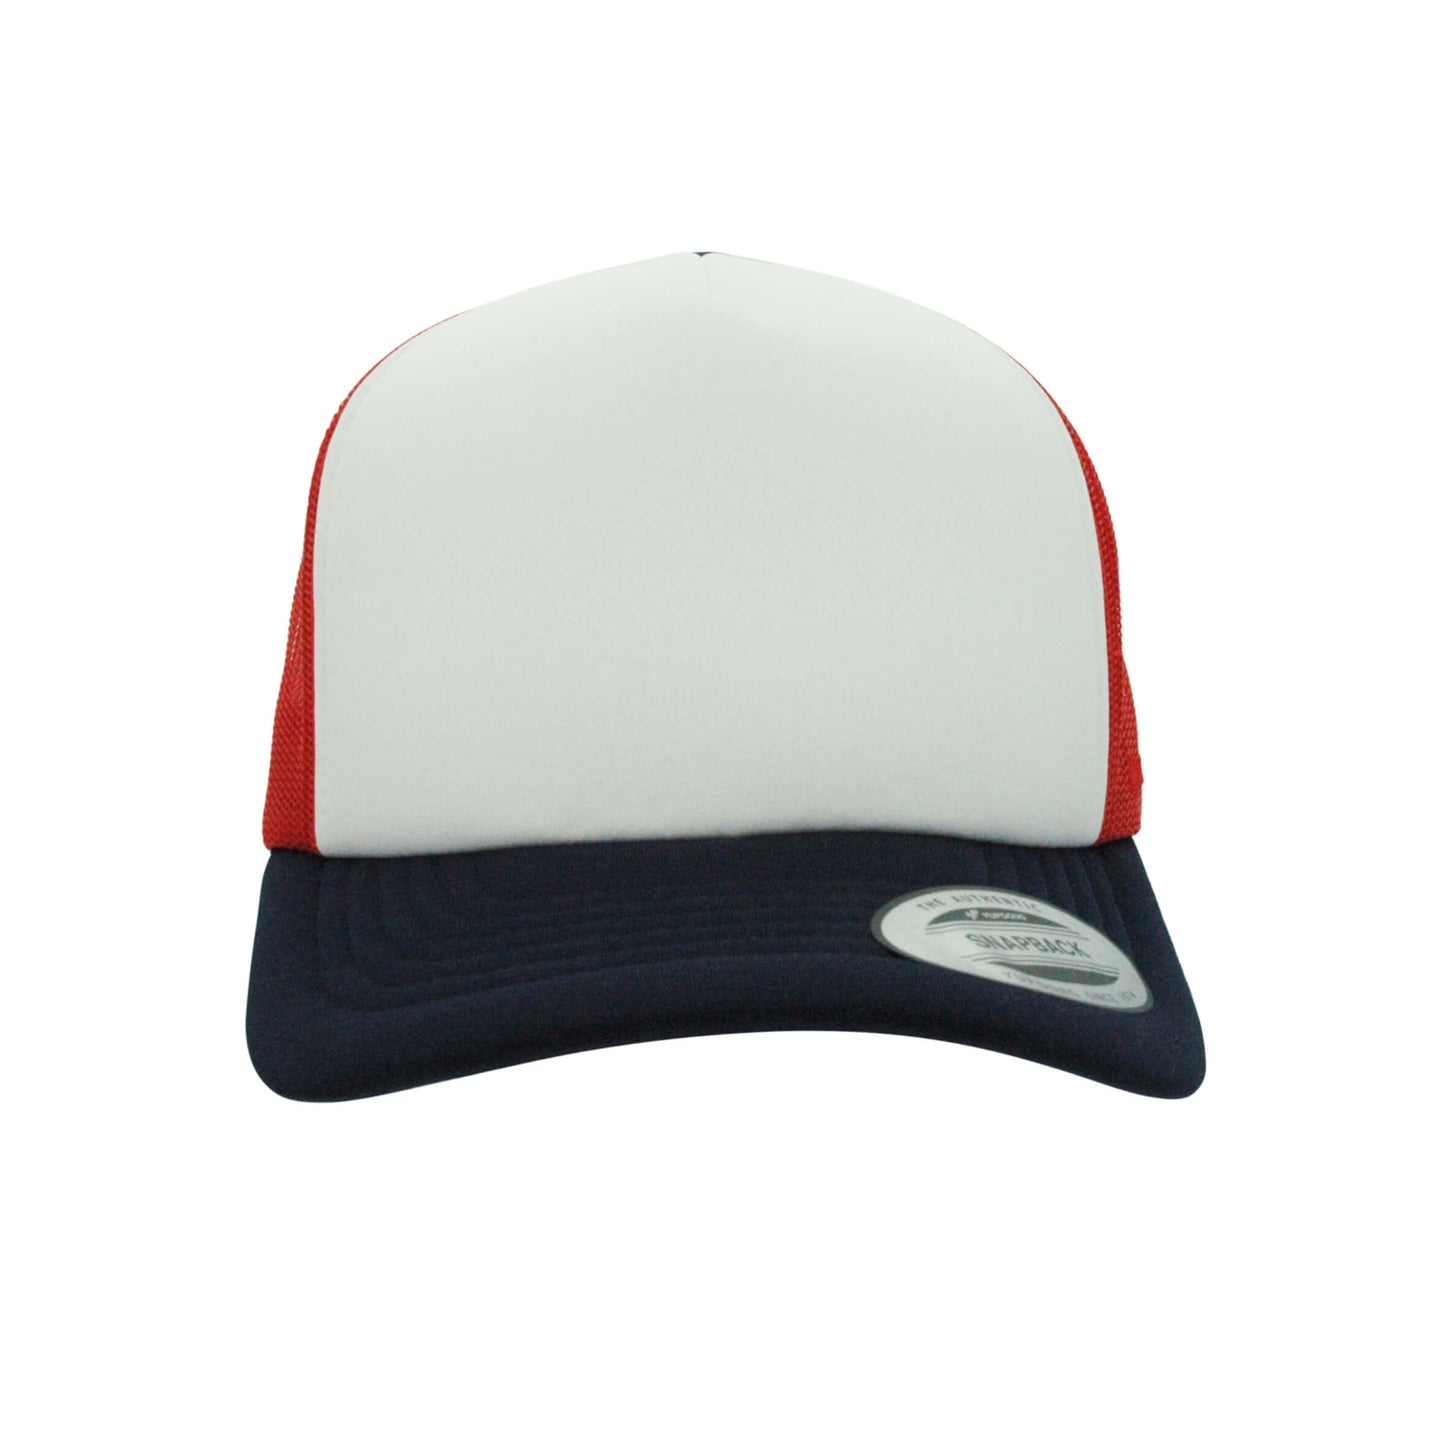 6700-RD/WH/NVY VZ Trucker Red, White & Navy Cap Adjustable Fit